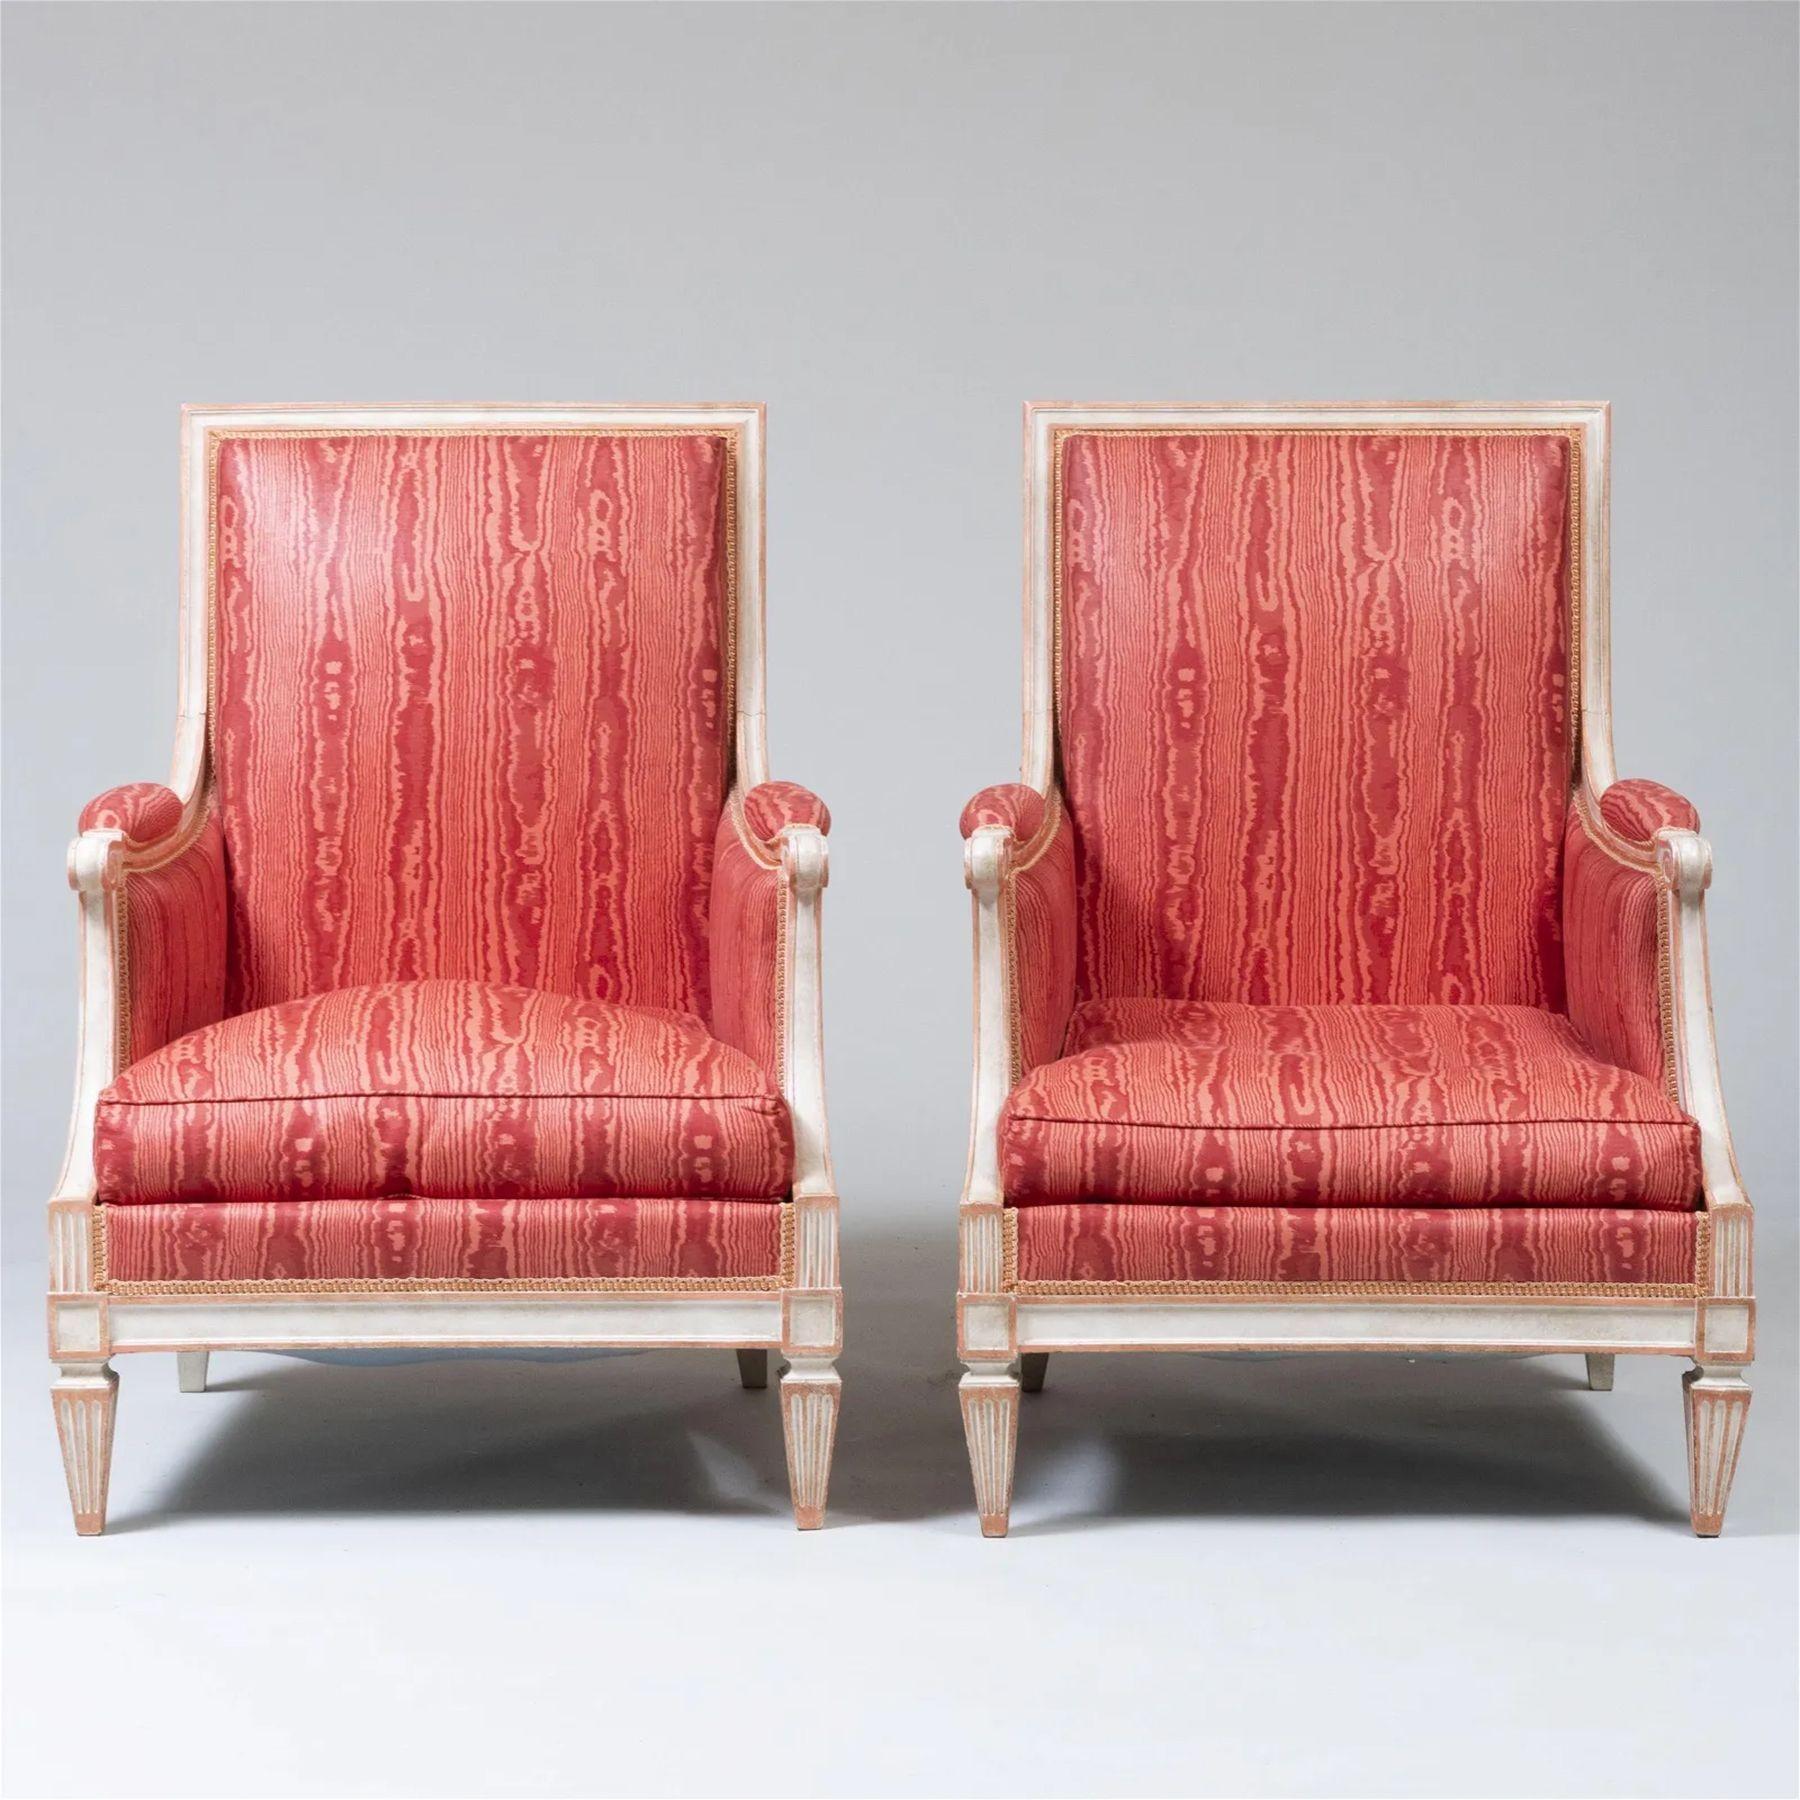 Pair of Louis XVI Style Painted Bergère Arm/Lounge Chairs, Traditional, France

Traditional Bergere, Wingback or Armchairs with a cream painted finish and pink upholstered fabric. Luxurious and comfortable are these oversized lounge chairs that